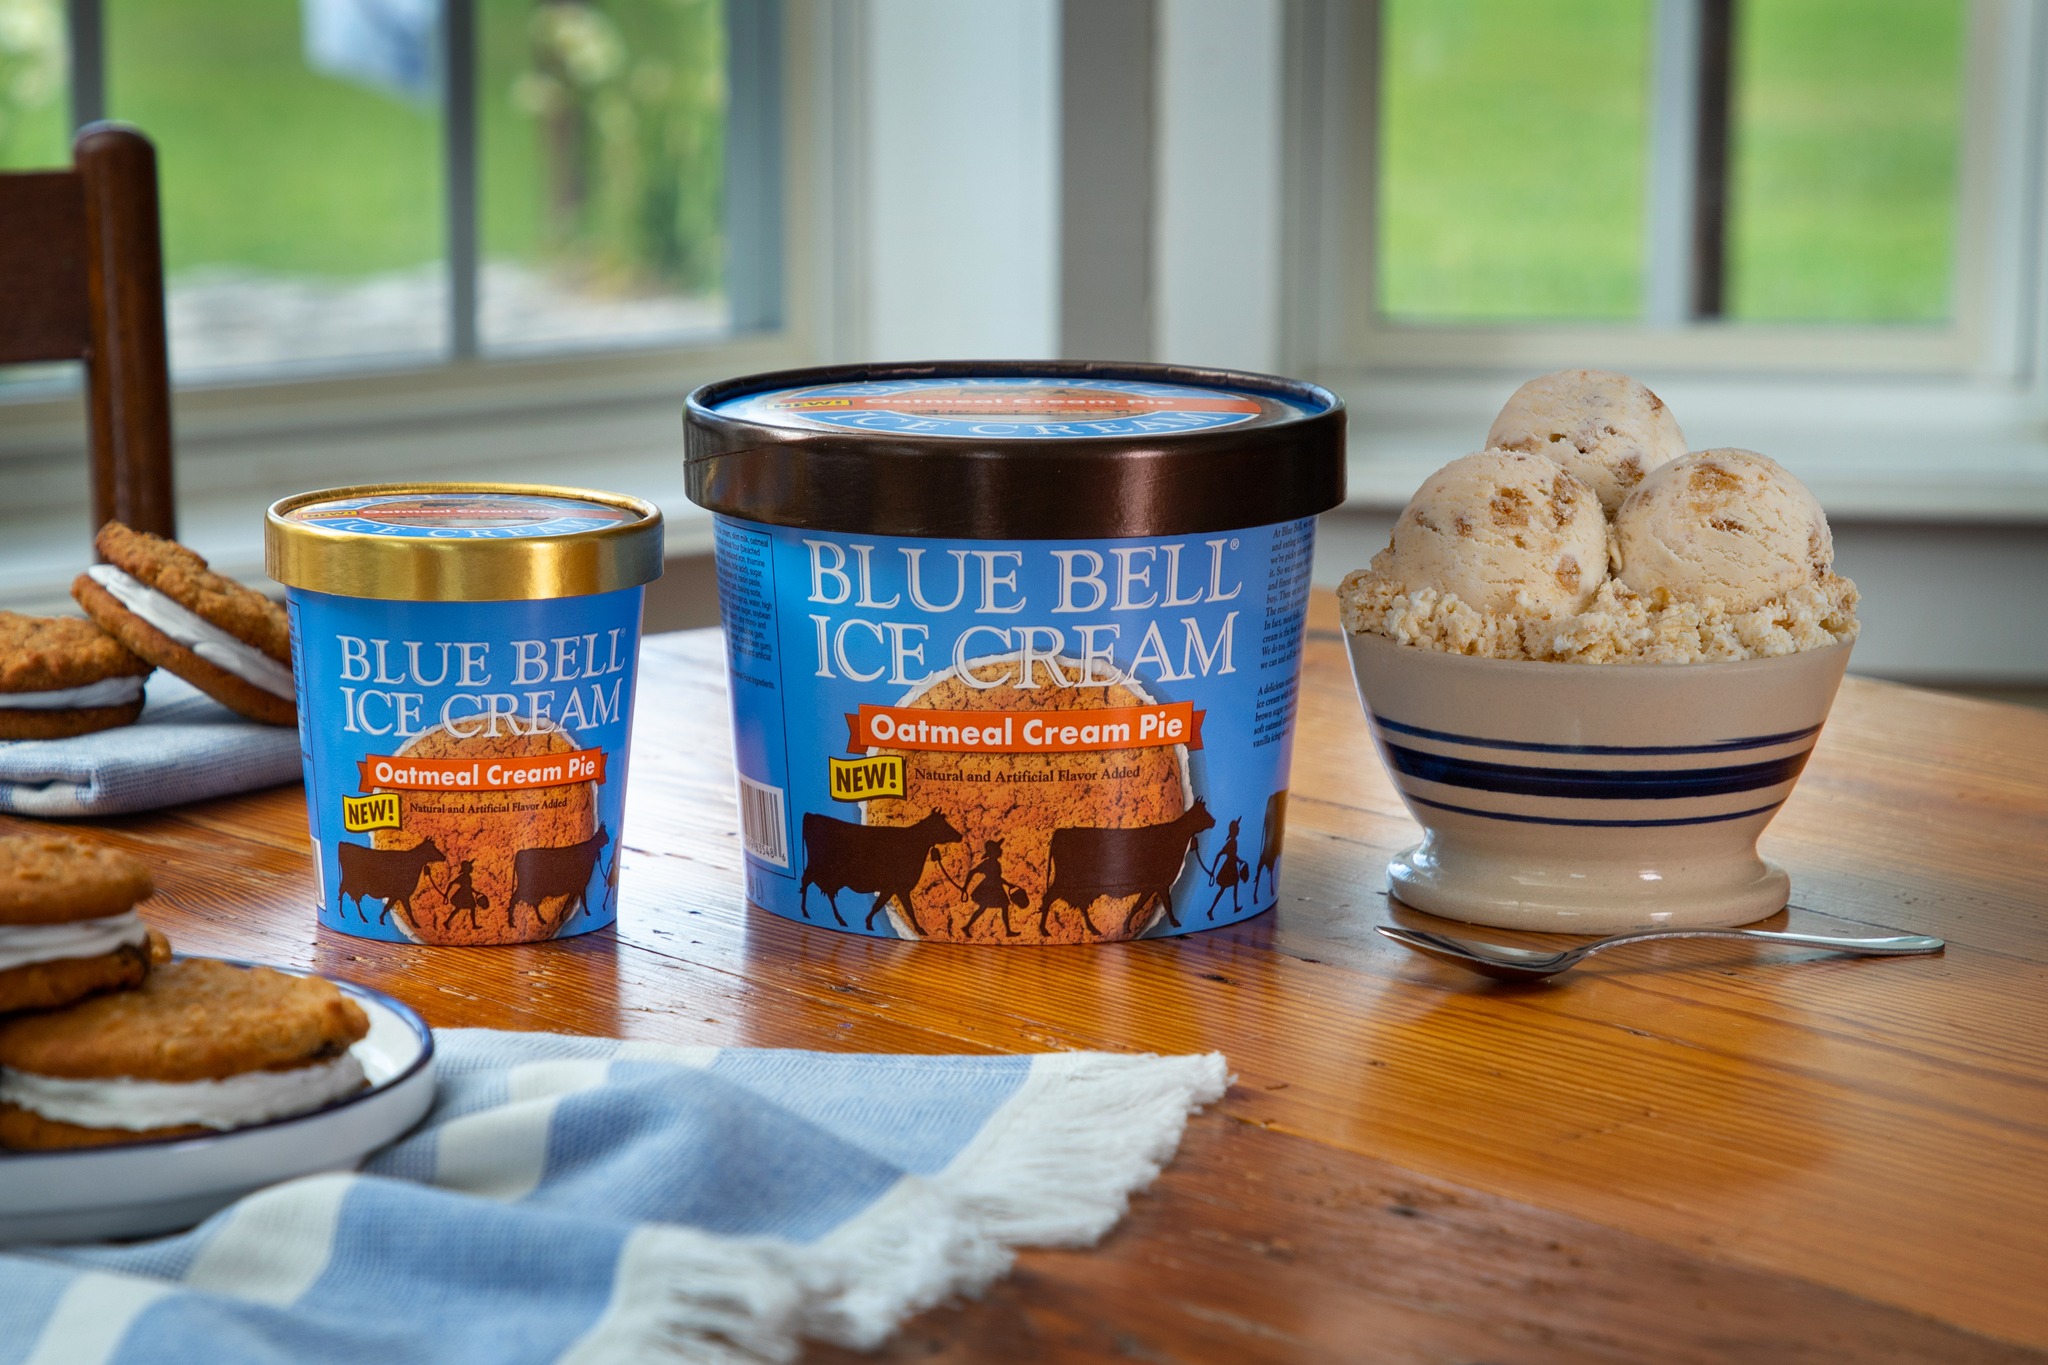 Blue Bell celebrates National Ice Cream Day with a new flavor